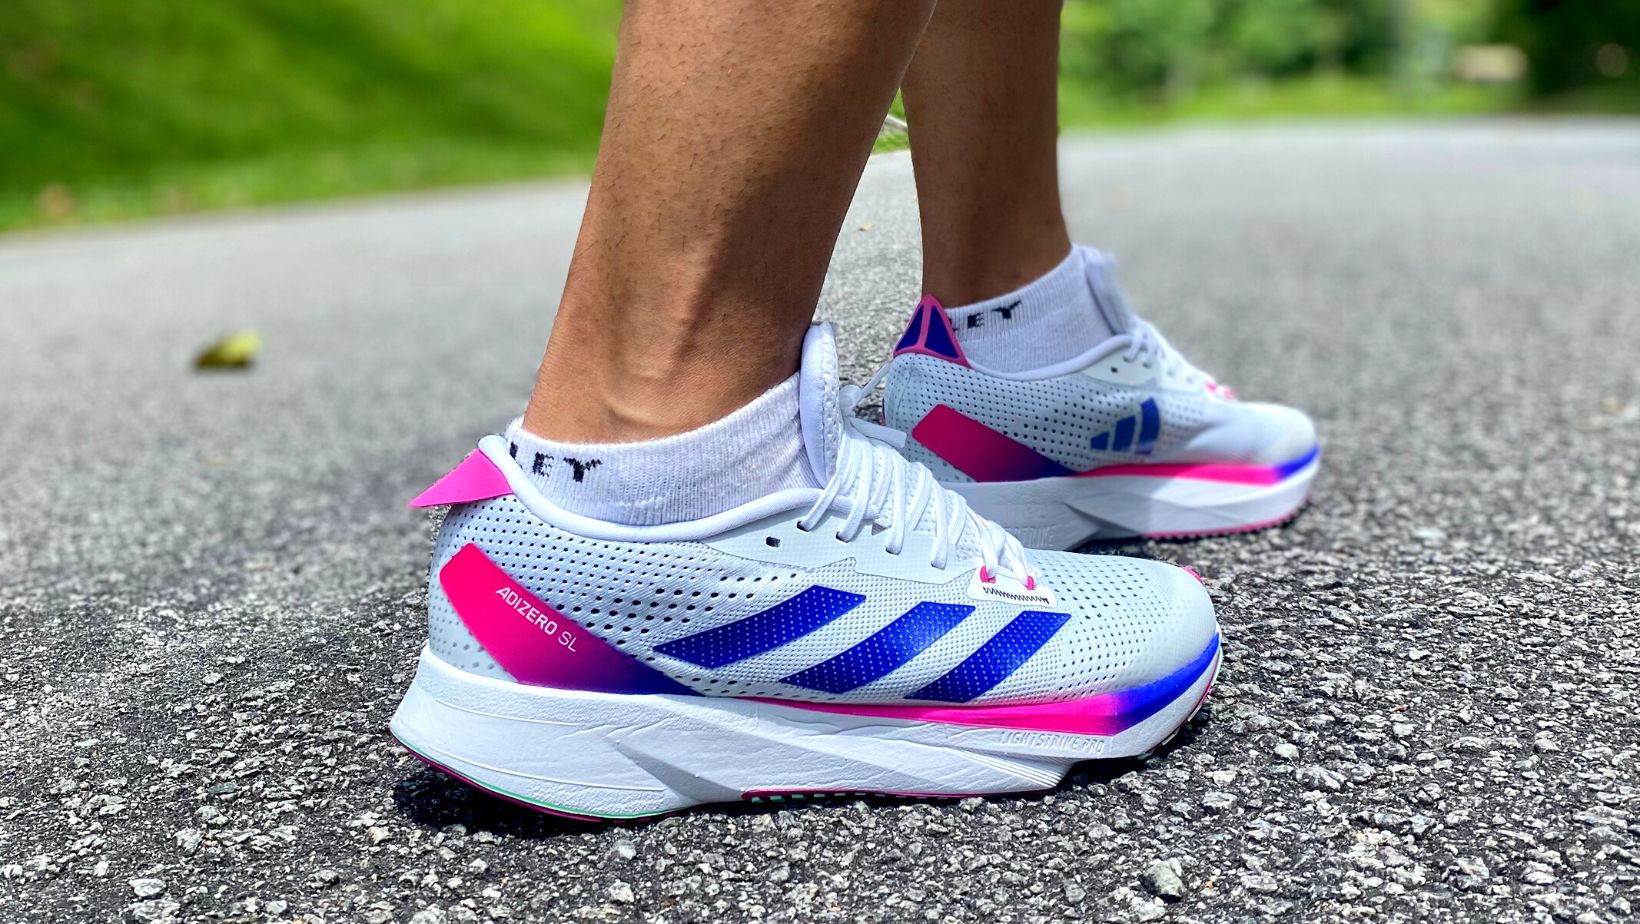 ADIDAS ADIZERO SL Review - Hands-On Features - ArenaMalaysia.Asia